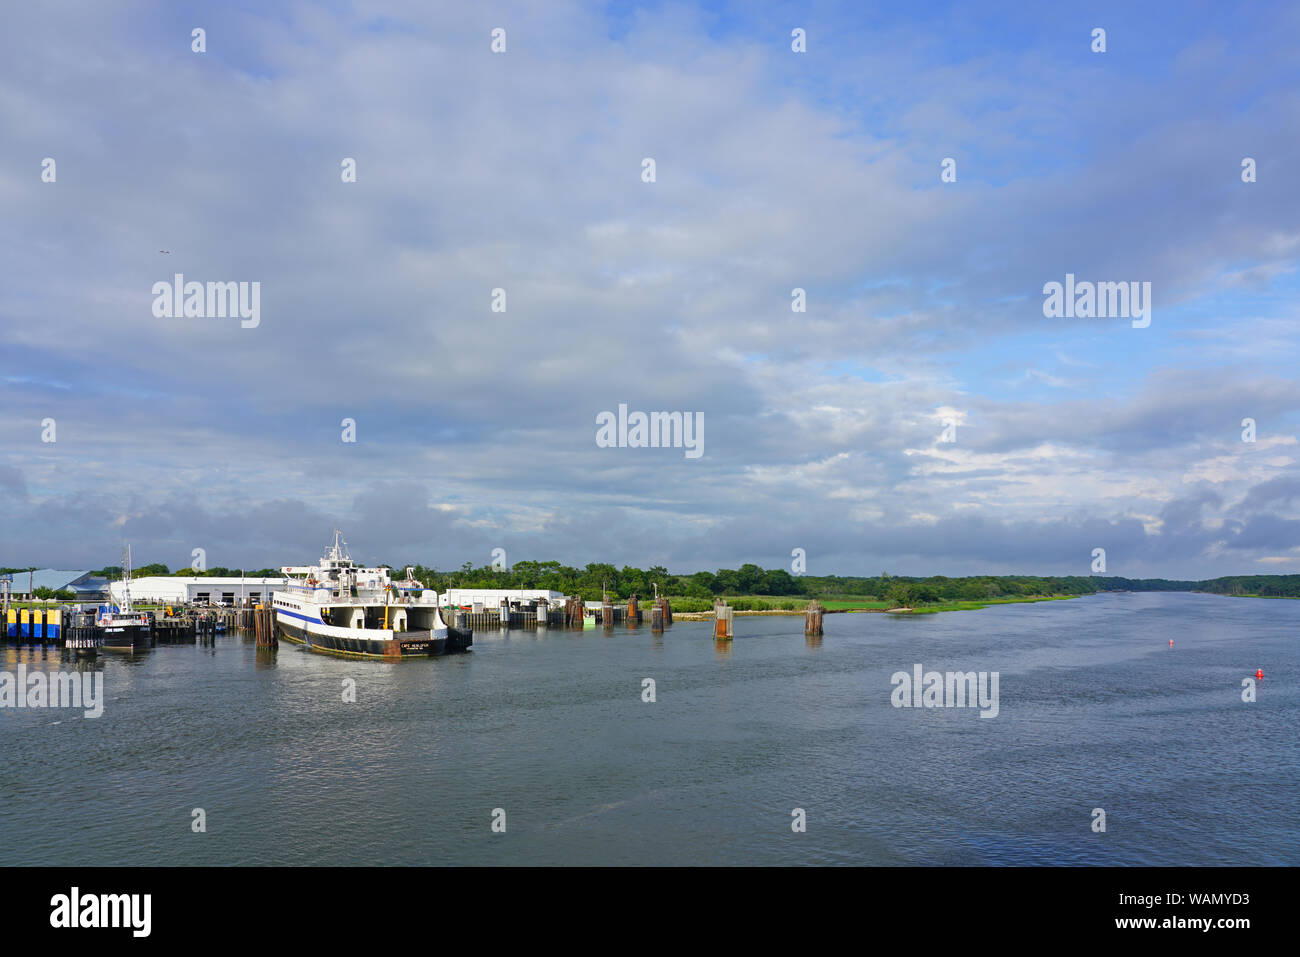 CAPE MAY, NJ -14 AUG 2019- View of the terminal of the Cape May-Lewes Ferry in Cape May, New Jersey, which crosses the Delaware Bay between New Jersey Stock Photo